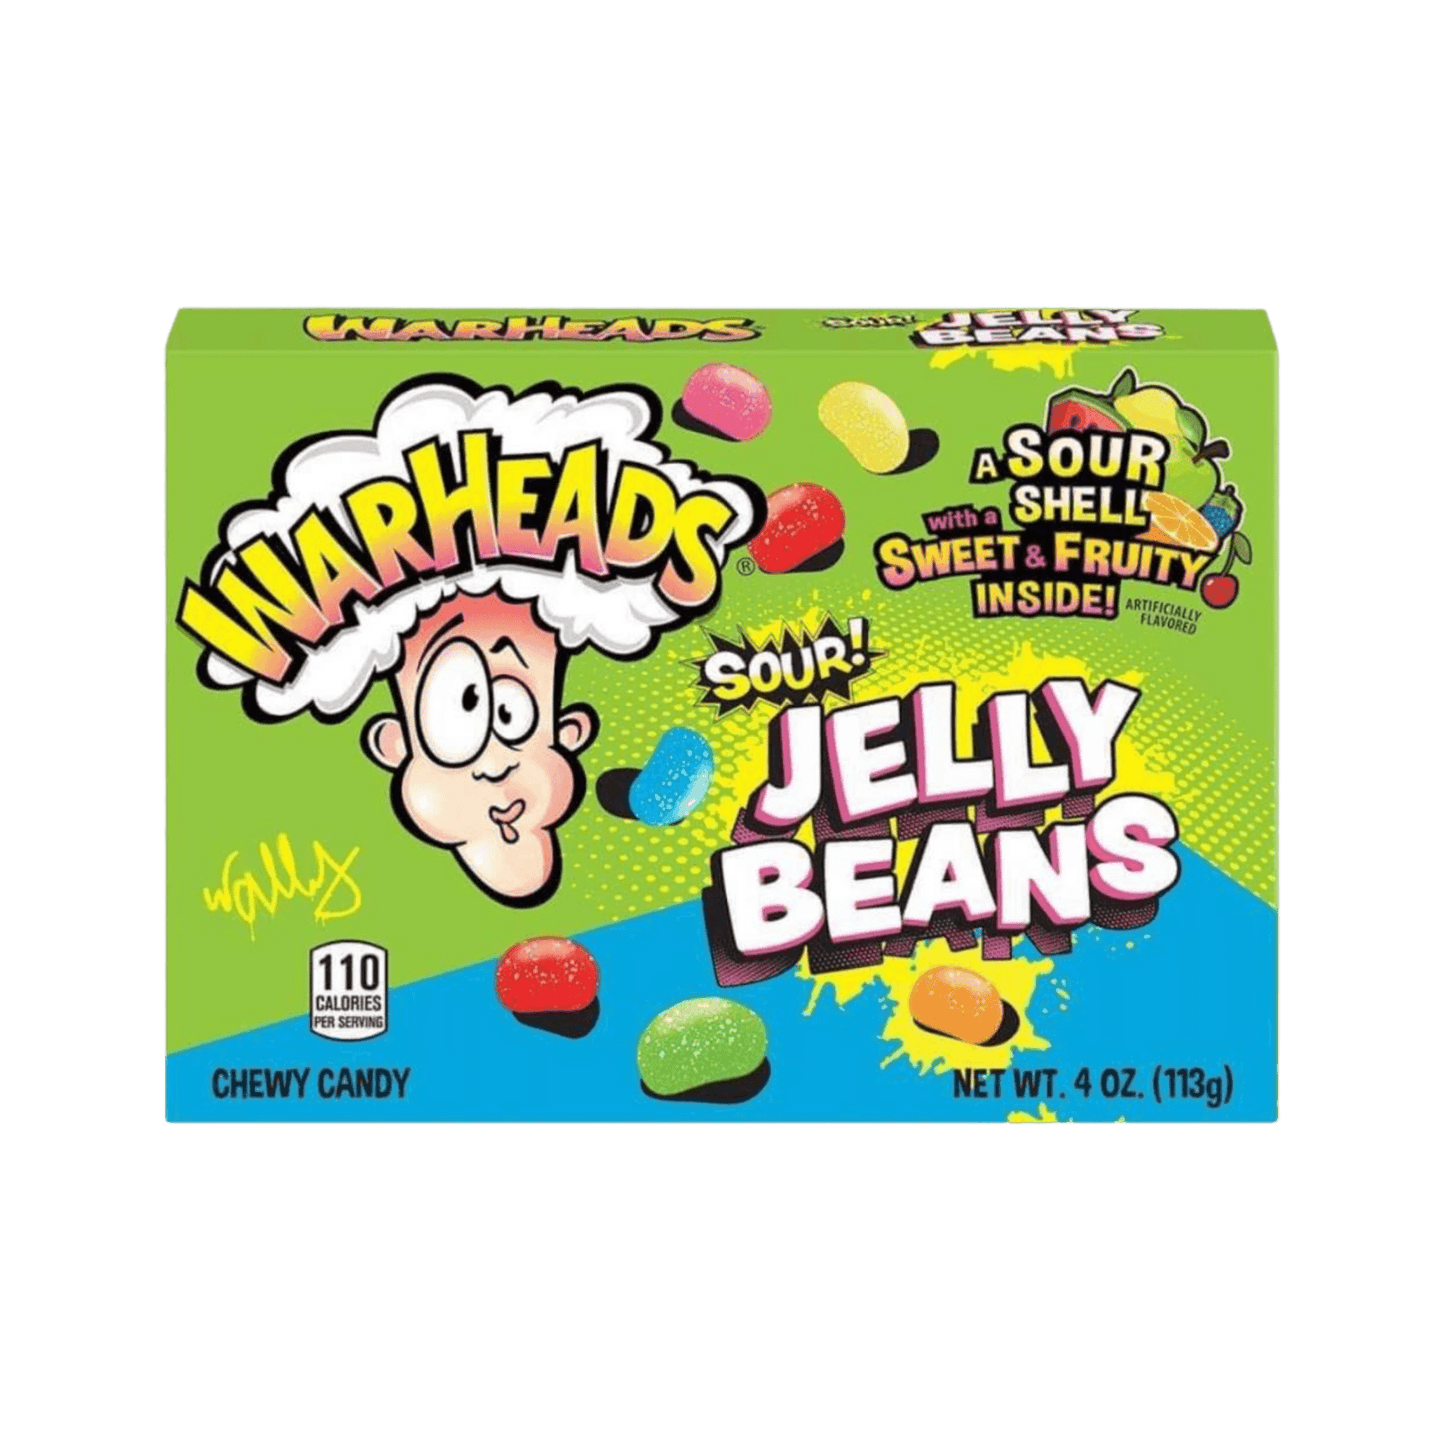 Warheads | Extreme Sour Jelly Beans (113g) - Candy & Chocolate - Scran.ie